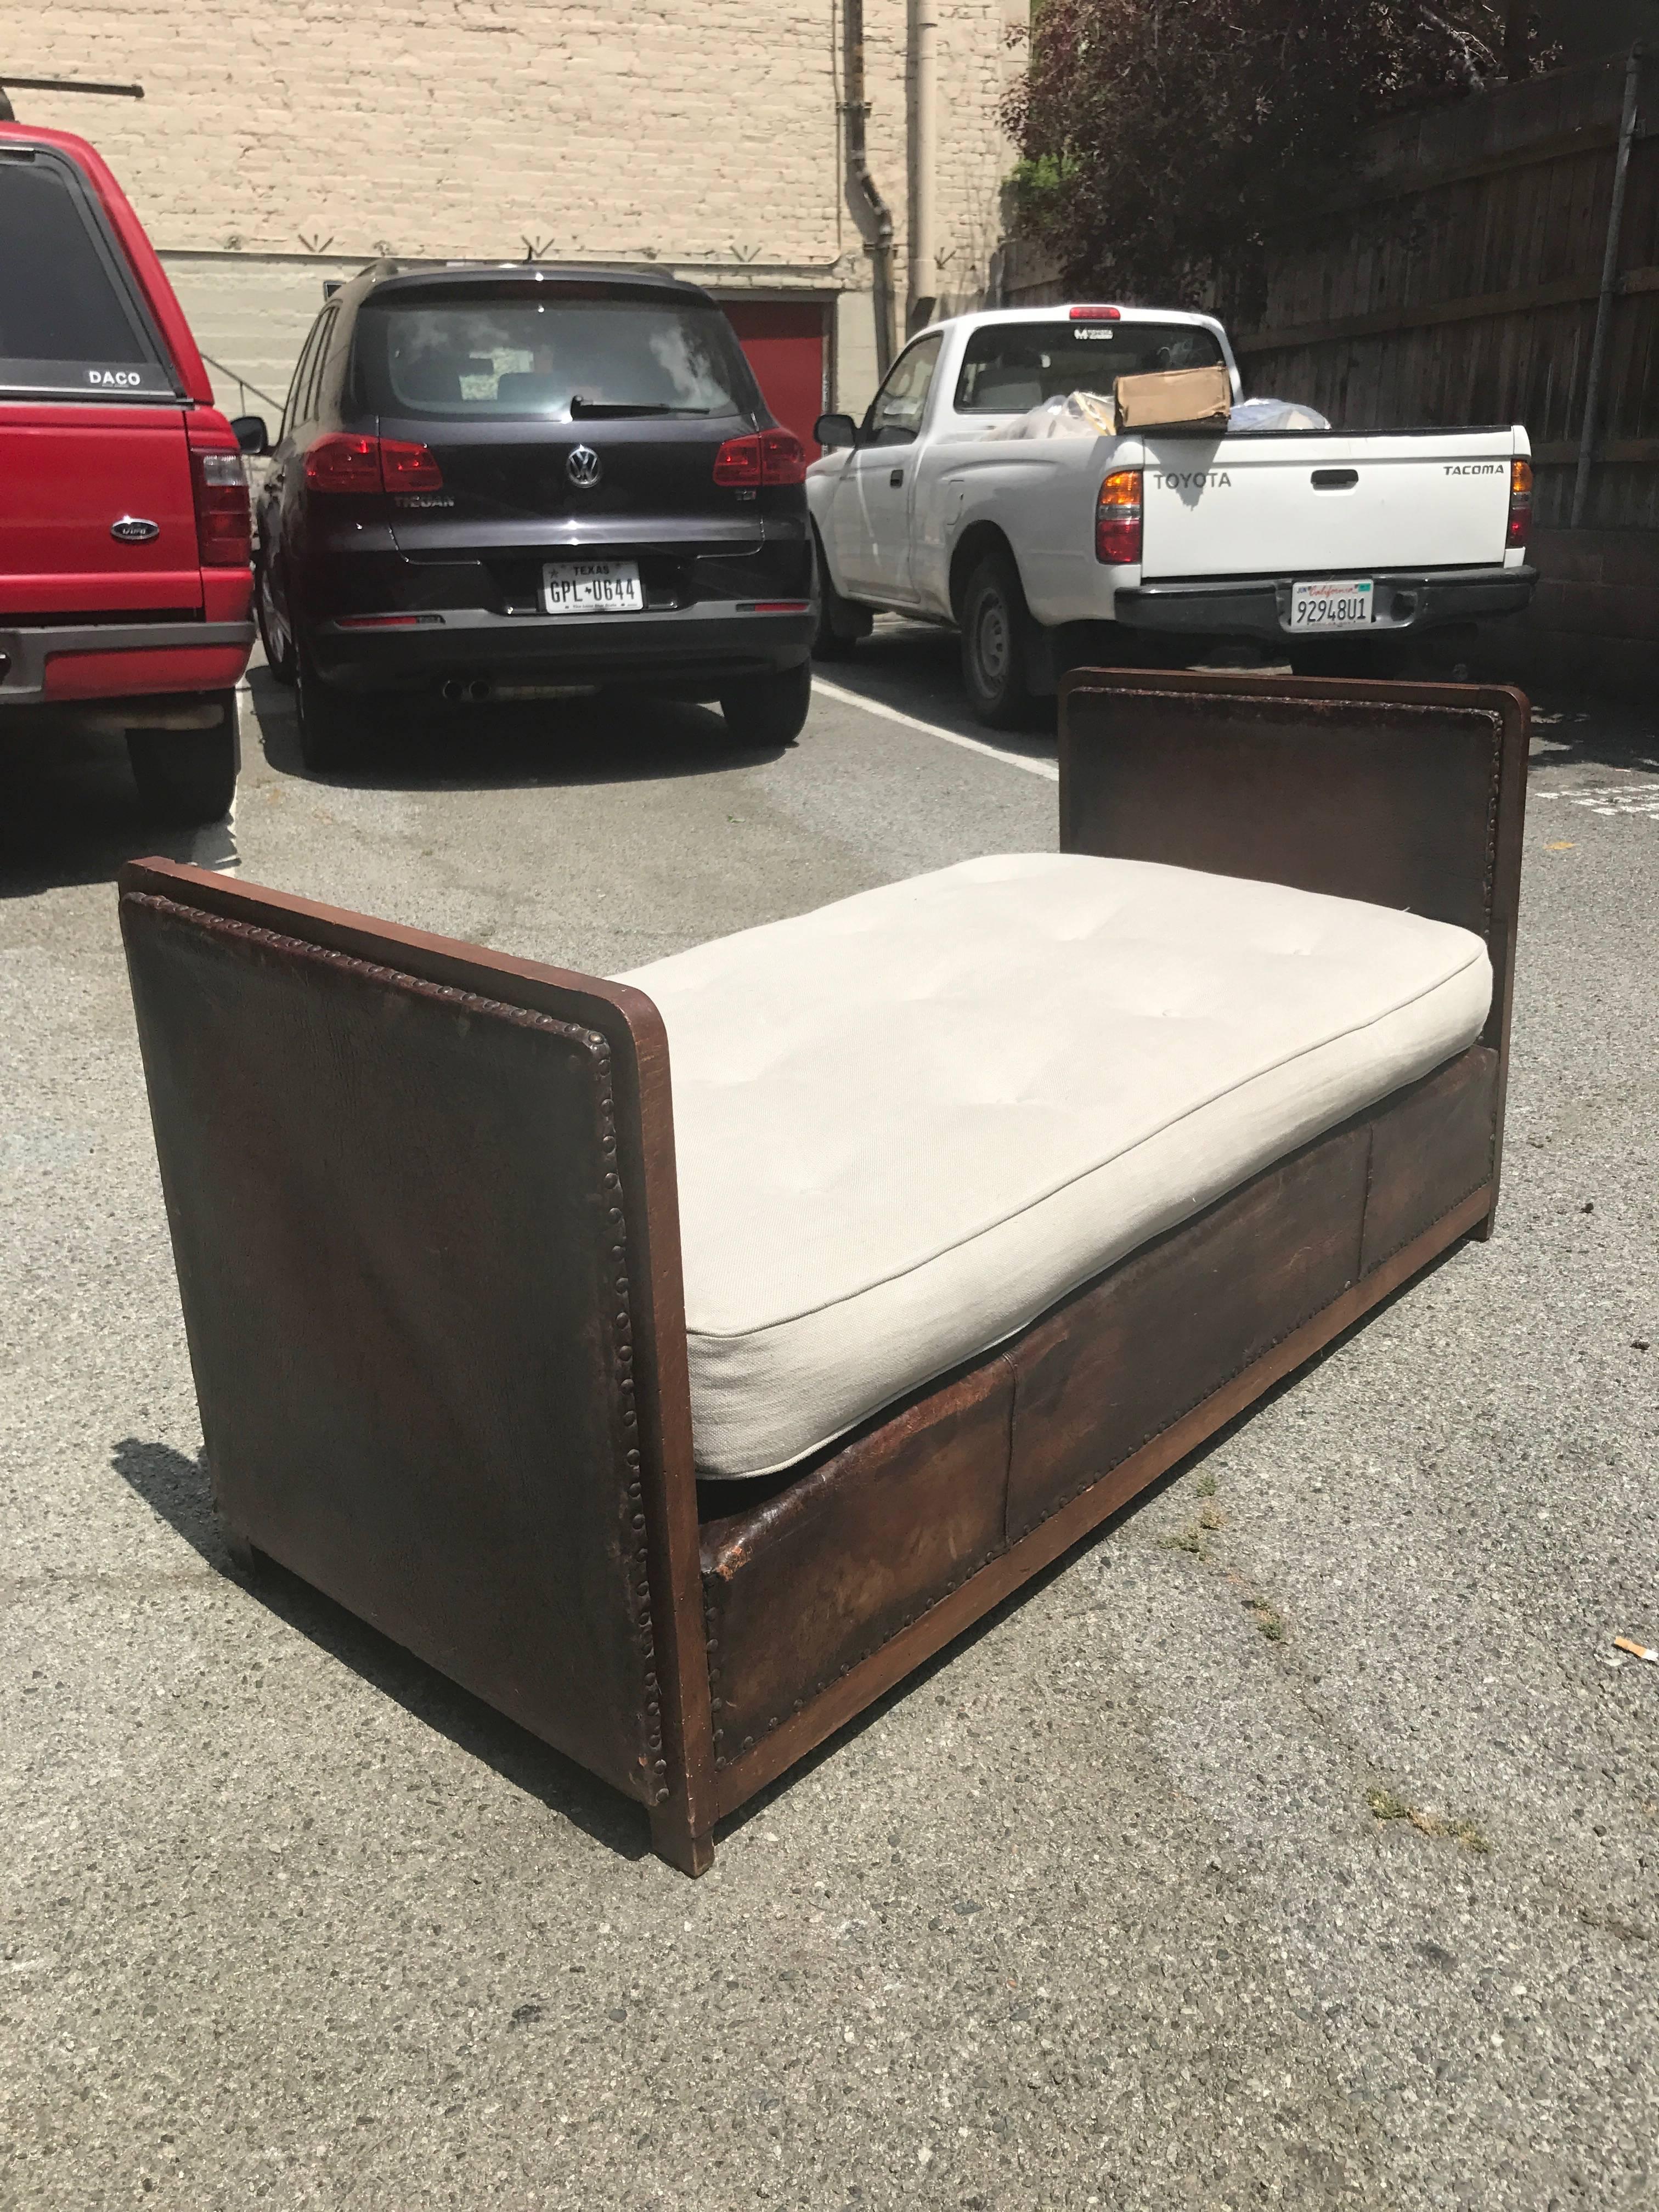 Vintage 1940s bench or daybed with a wooden frame, leather upholstery and nailhead trim. New cushion. This beautiful piece would be perfect for a bedroom, living room, or a boutique!